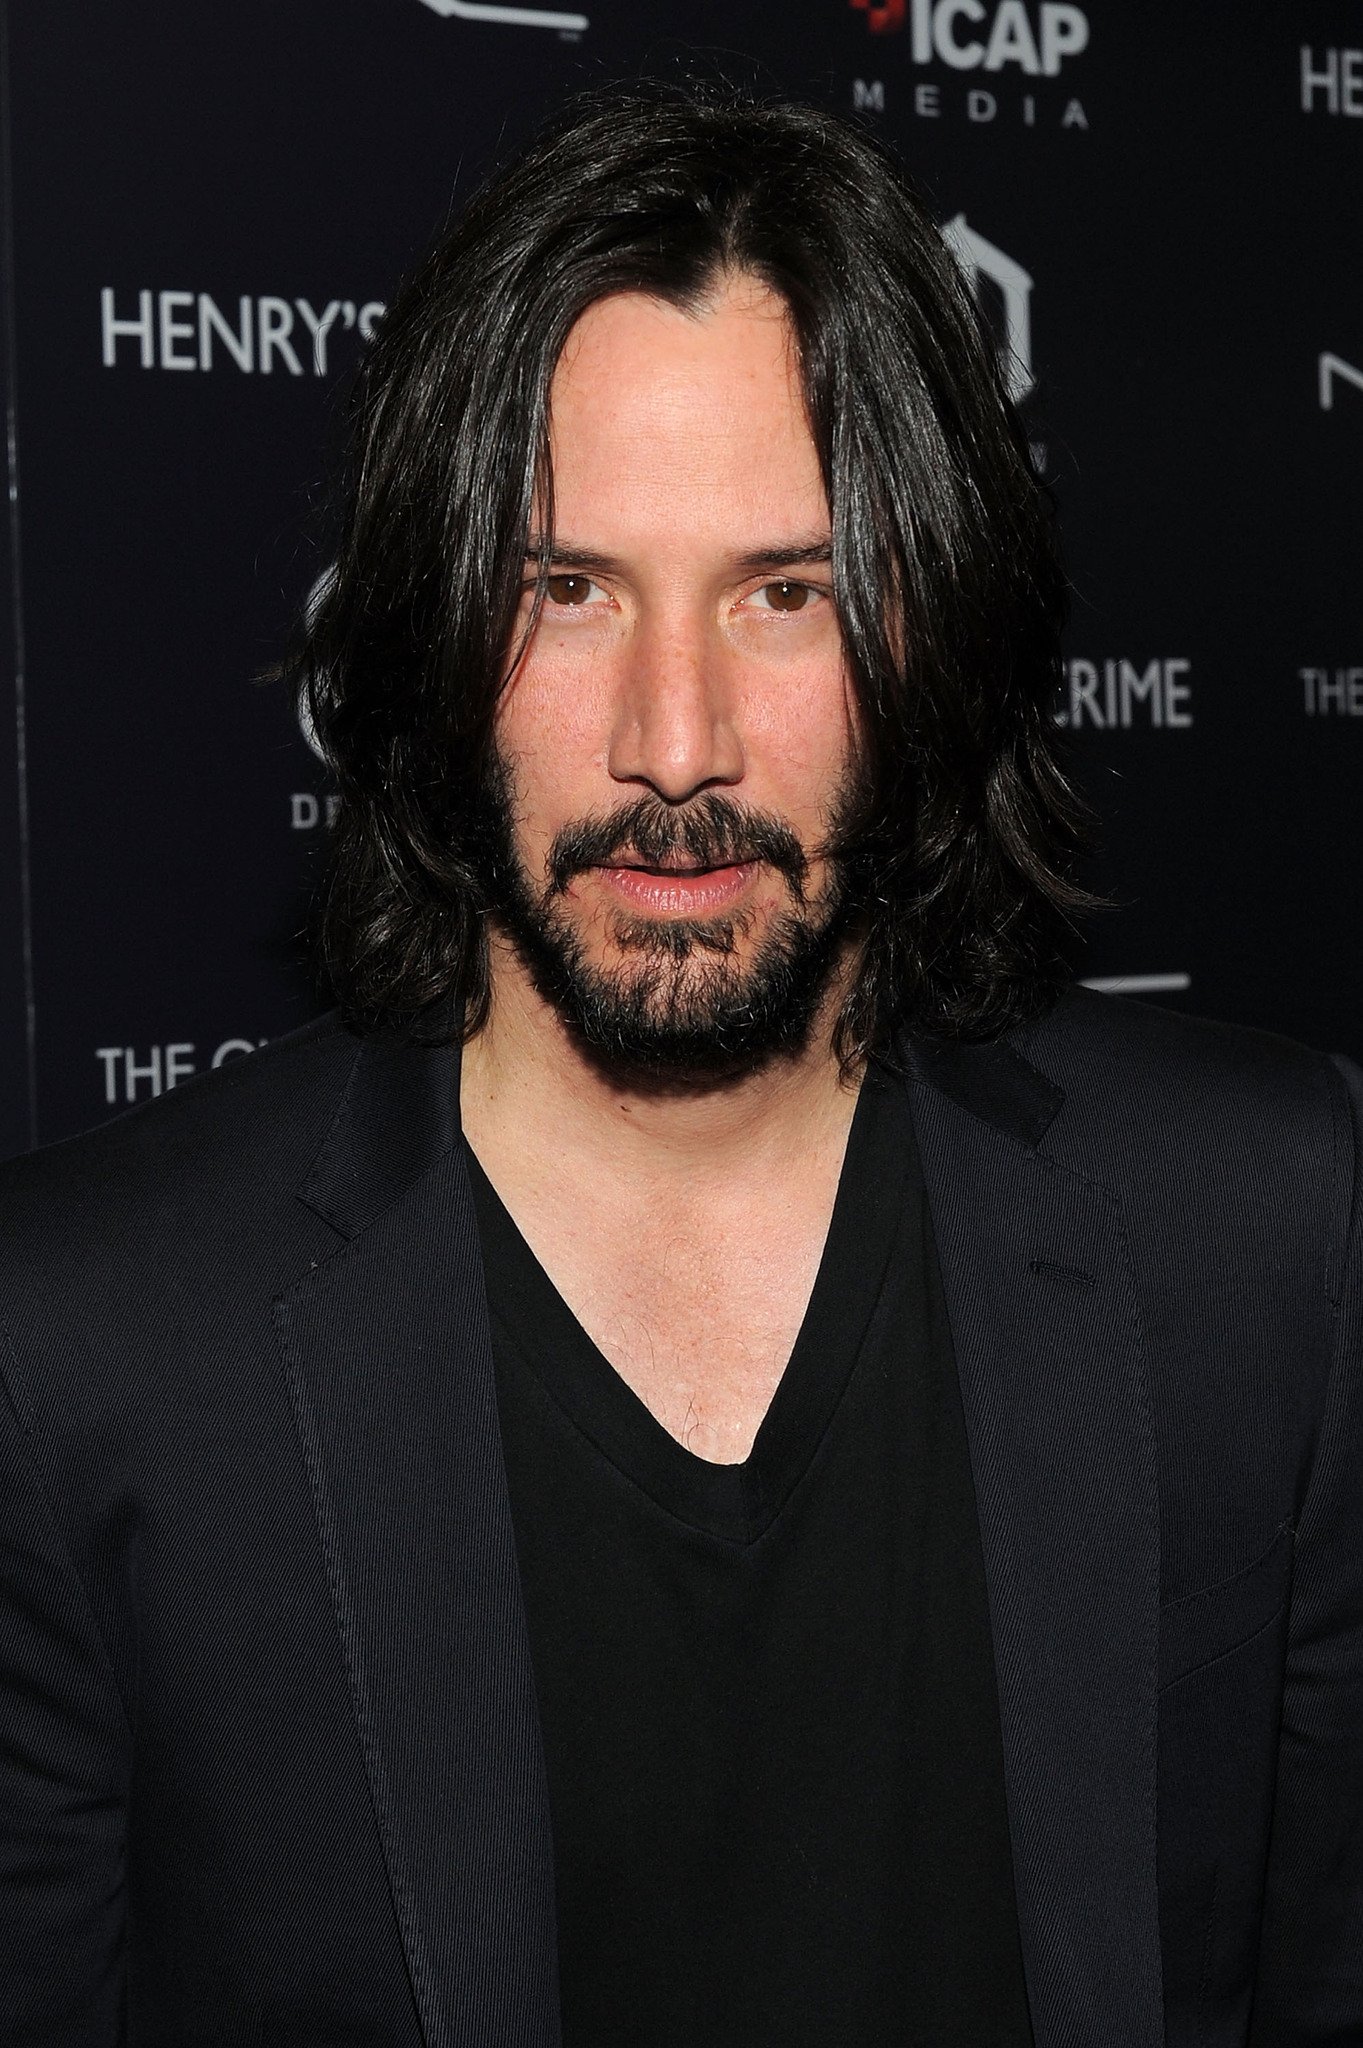 Keanu Reeves at event of Henry's Crime (2010)